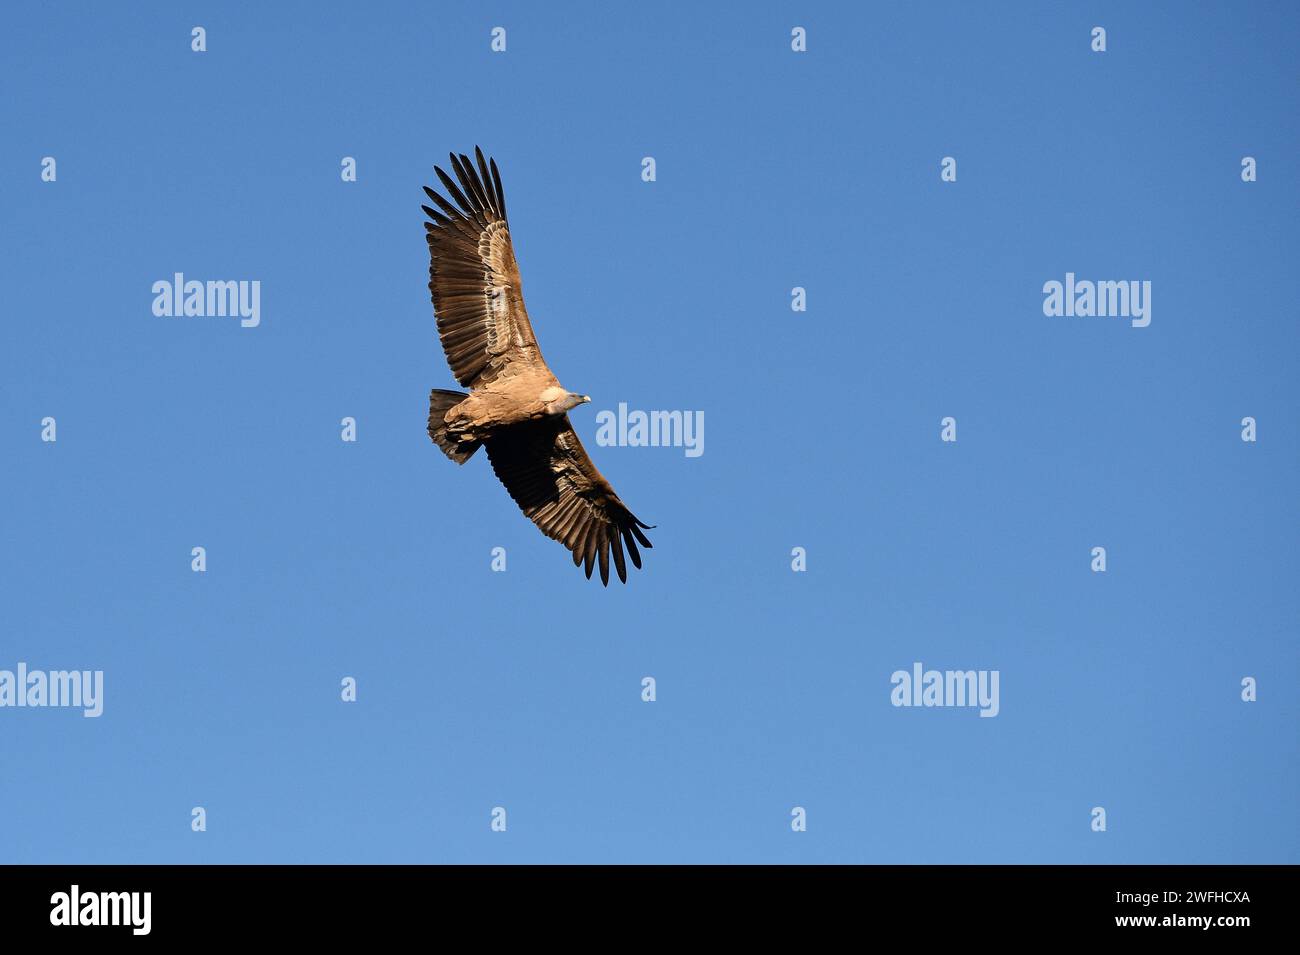 Large Vulture soaring through clear blue sky Stock Photo